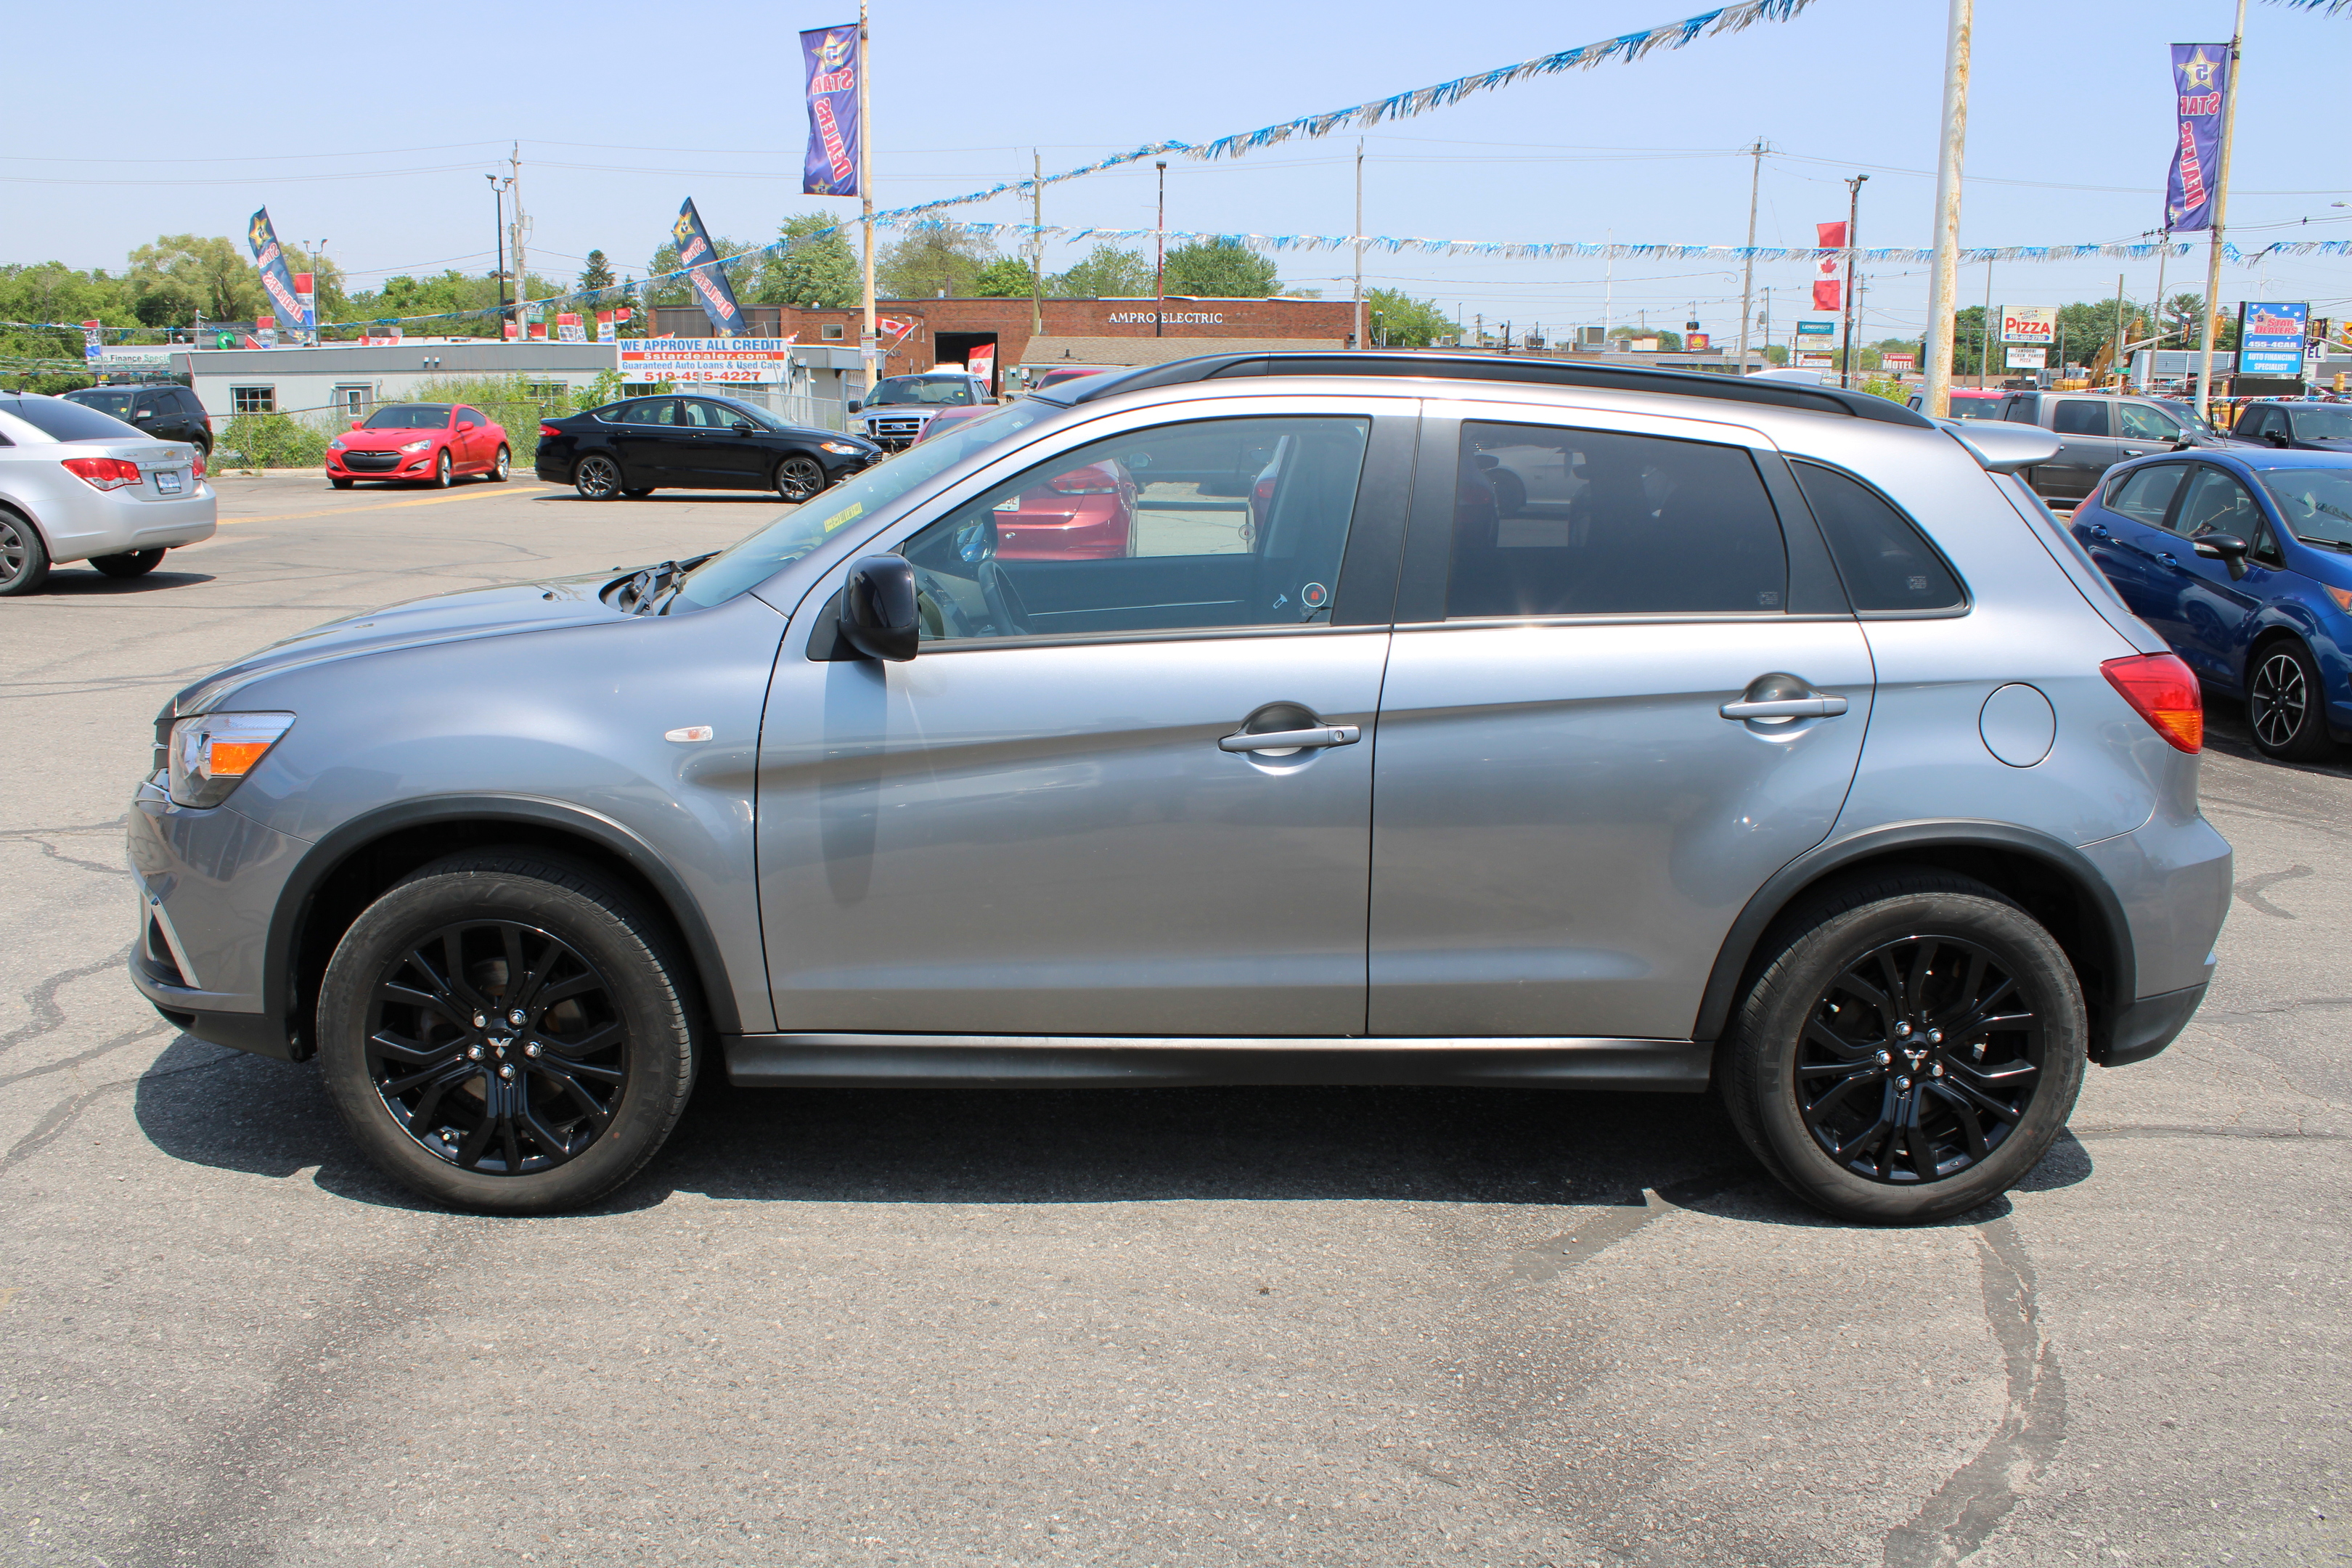 2018 Mitsubishi RVR PANO ROOF H-SEATS R-CAM LOADED! FINANCE NOW!